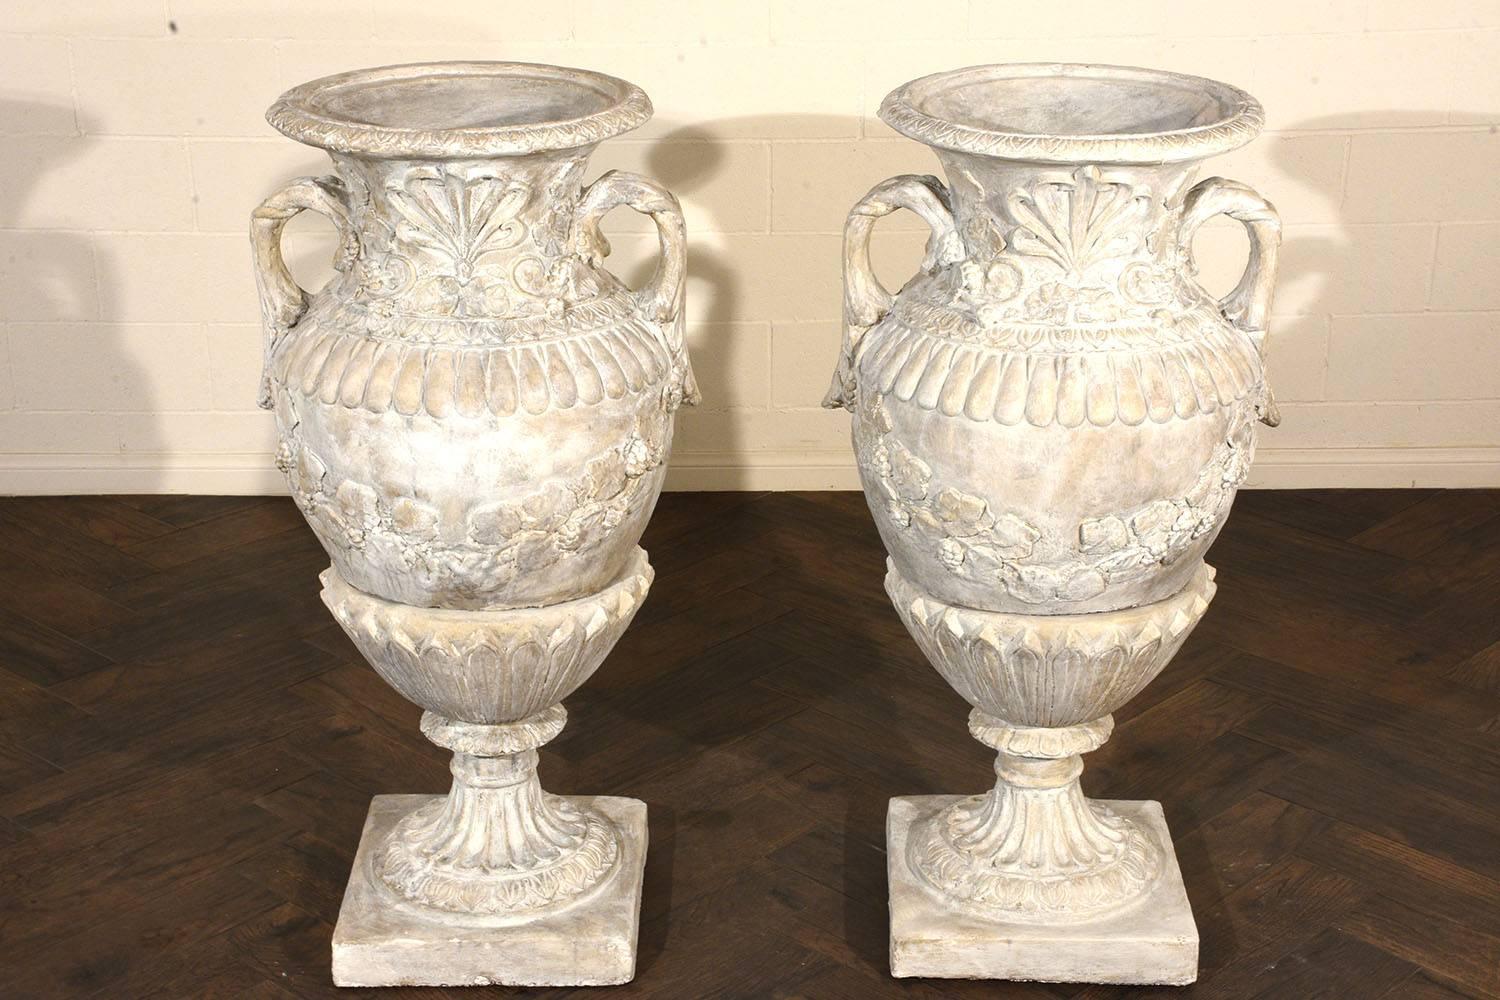 This pair of 1980s vintage grand patio urns are made of cast stone that have been painted in an off-white and grey combination using a white washing technique. The urns are adorned with ornate details of ripe vineyard vines, acanthus leaves, and